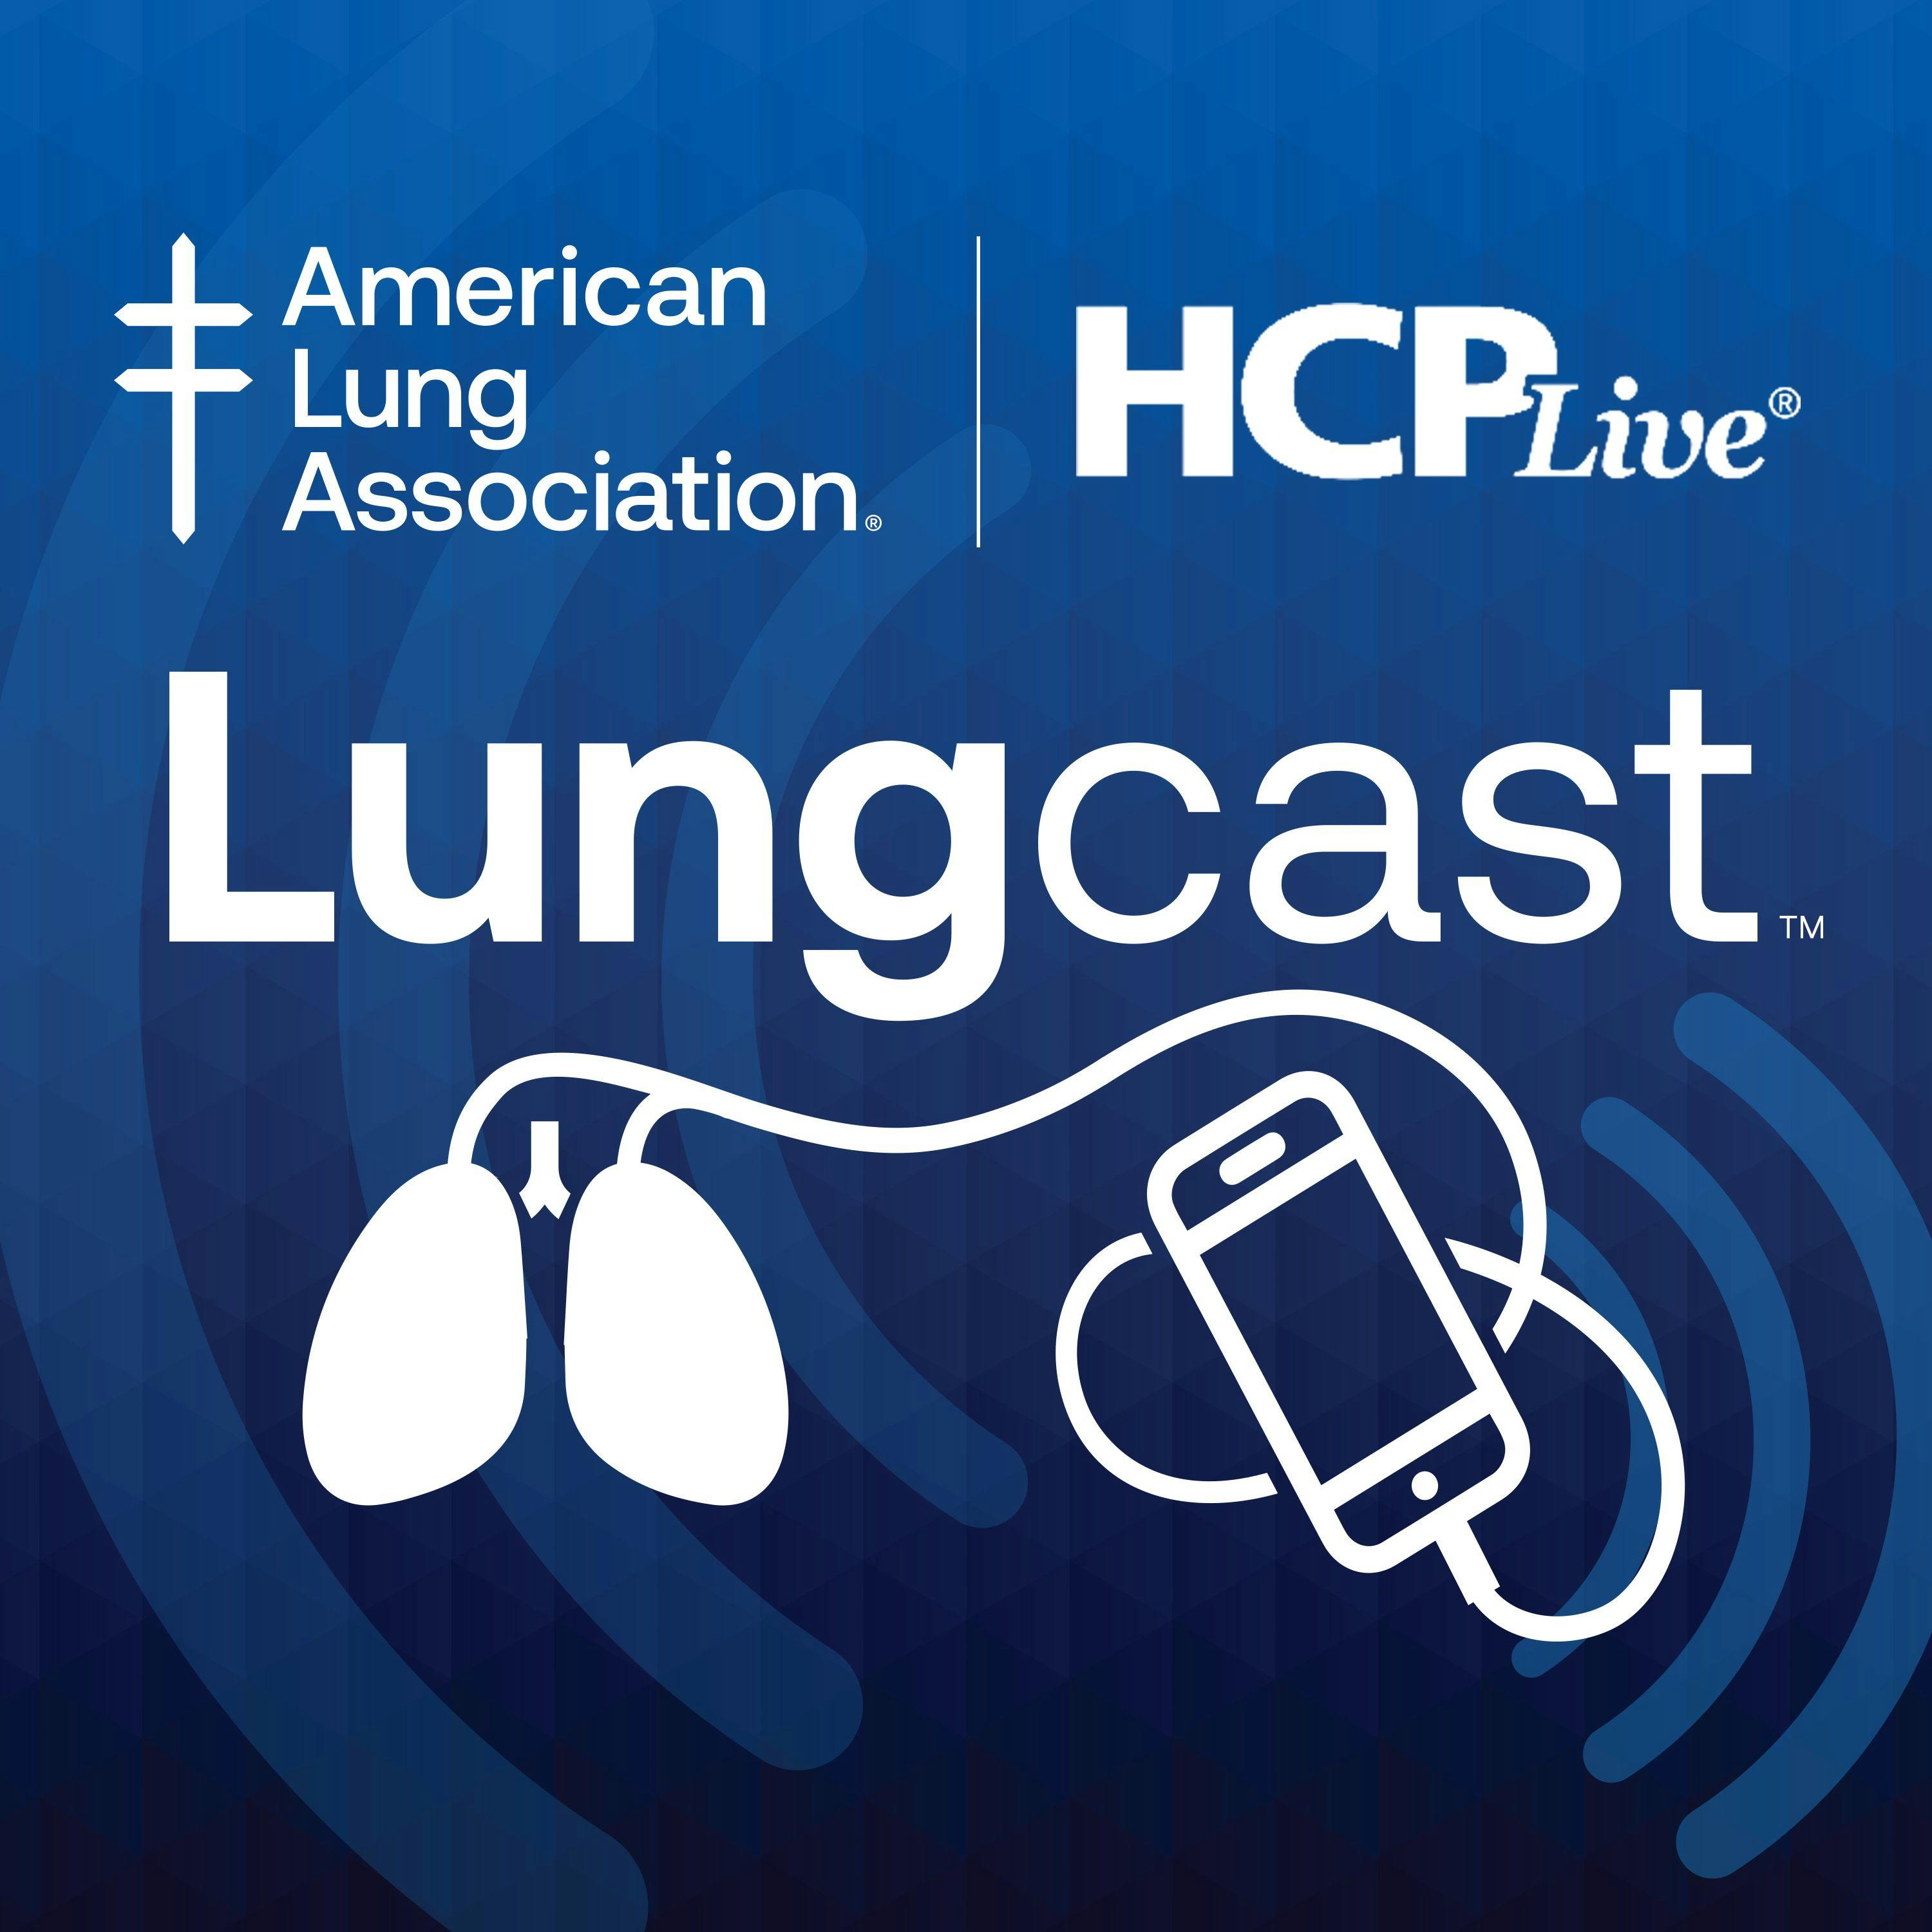 Lung Cancer Screening: Trials, Tribulations & Triumphs with Dr. James Mulshine